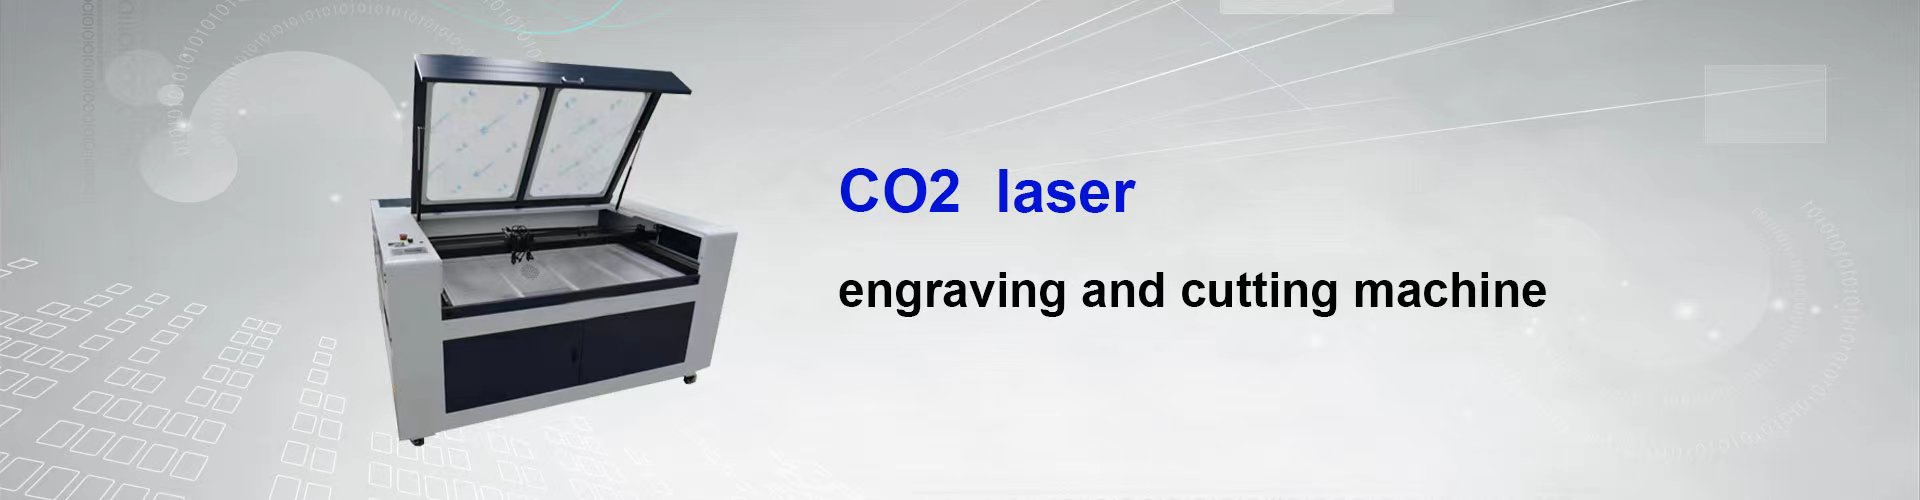 CO2 laser engraving and cutting mahcine 